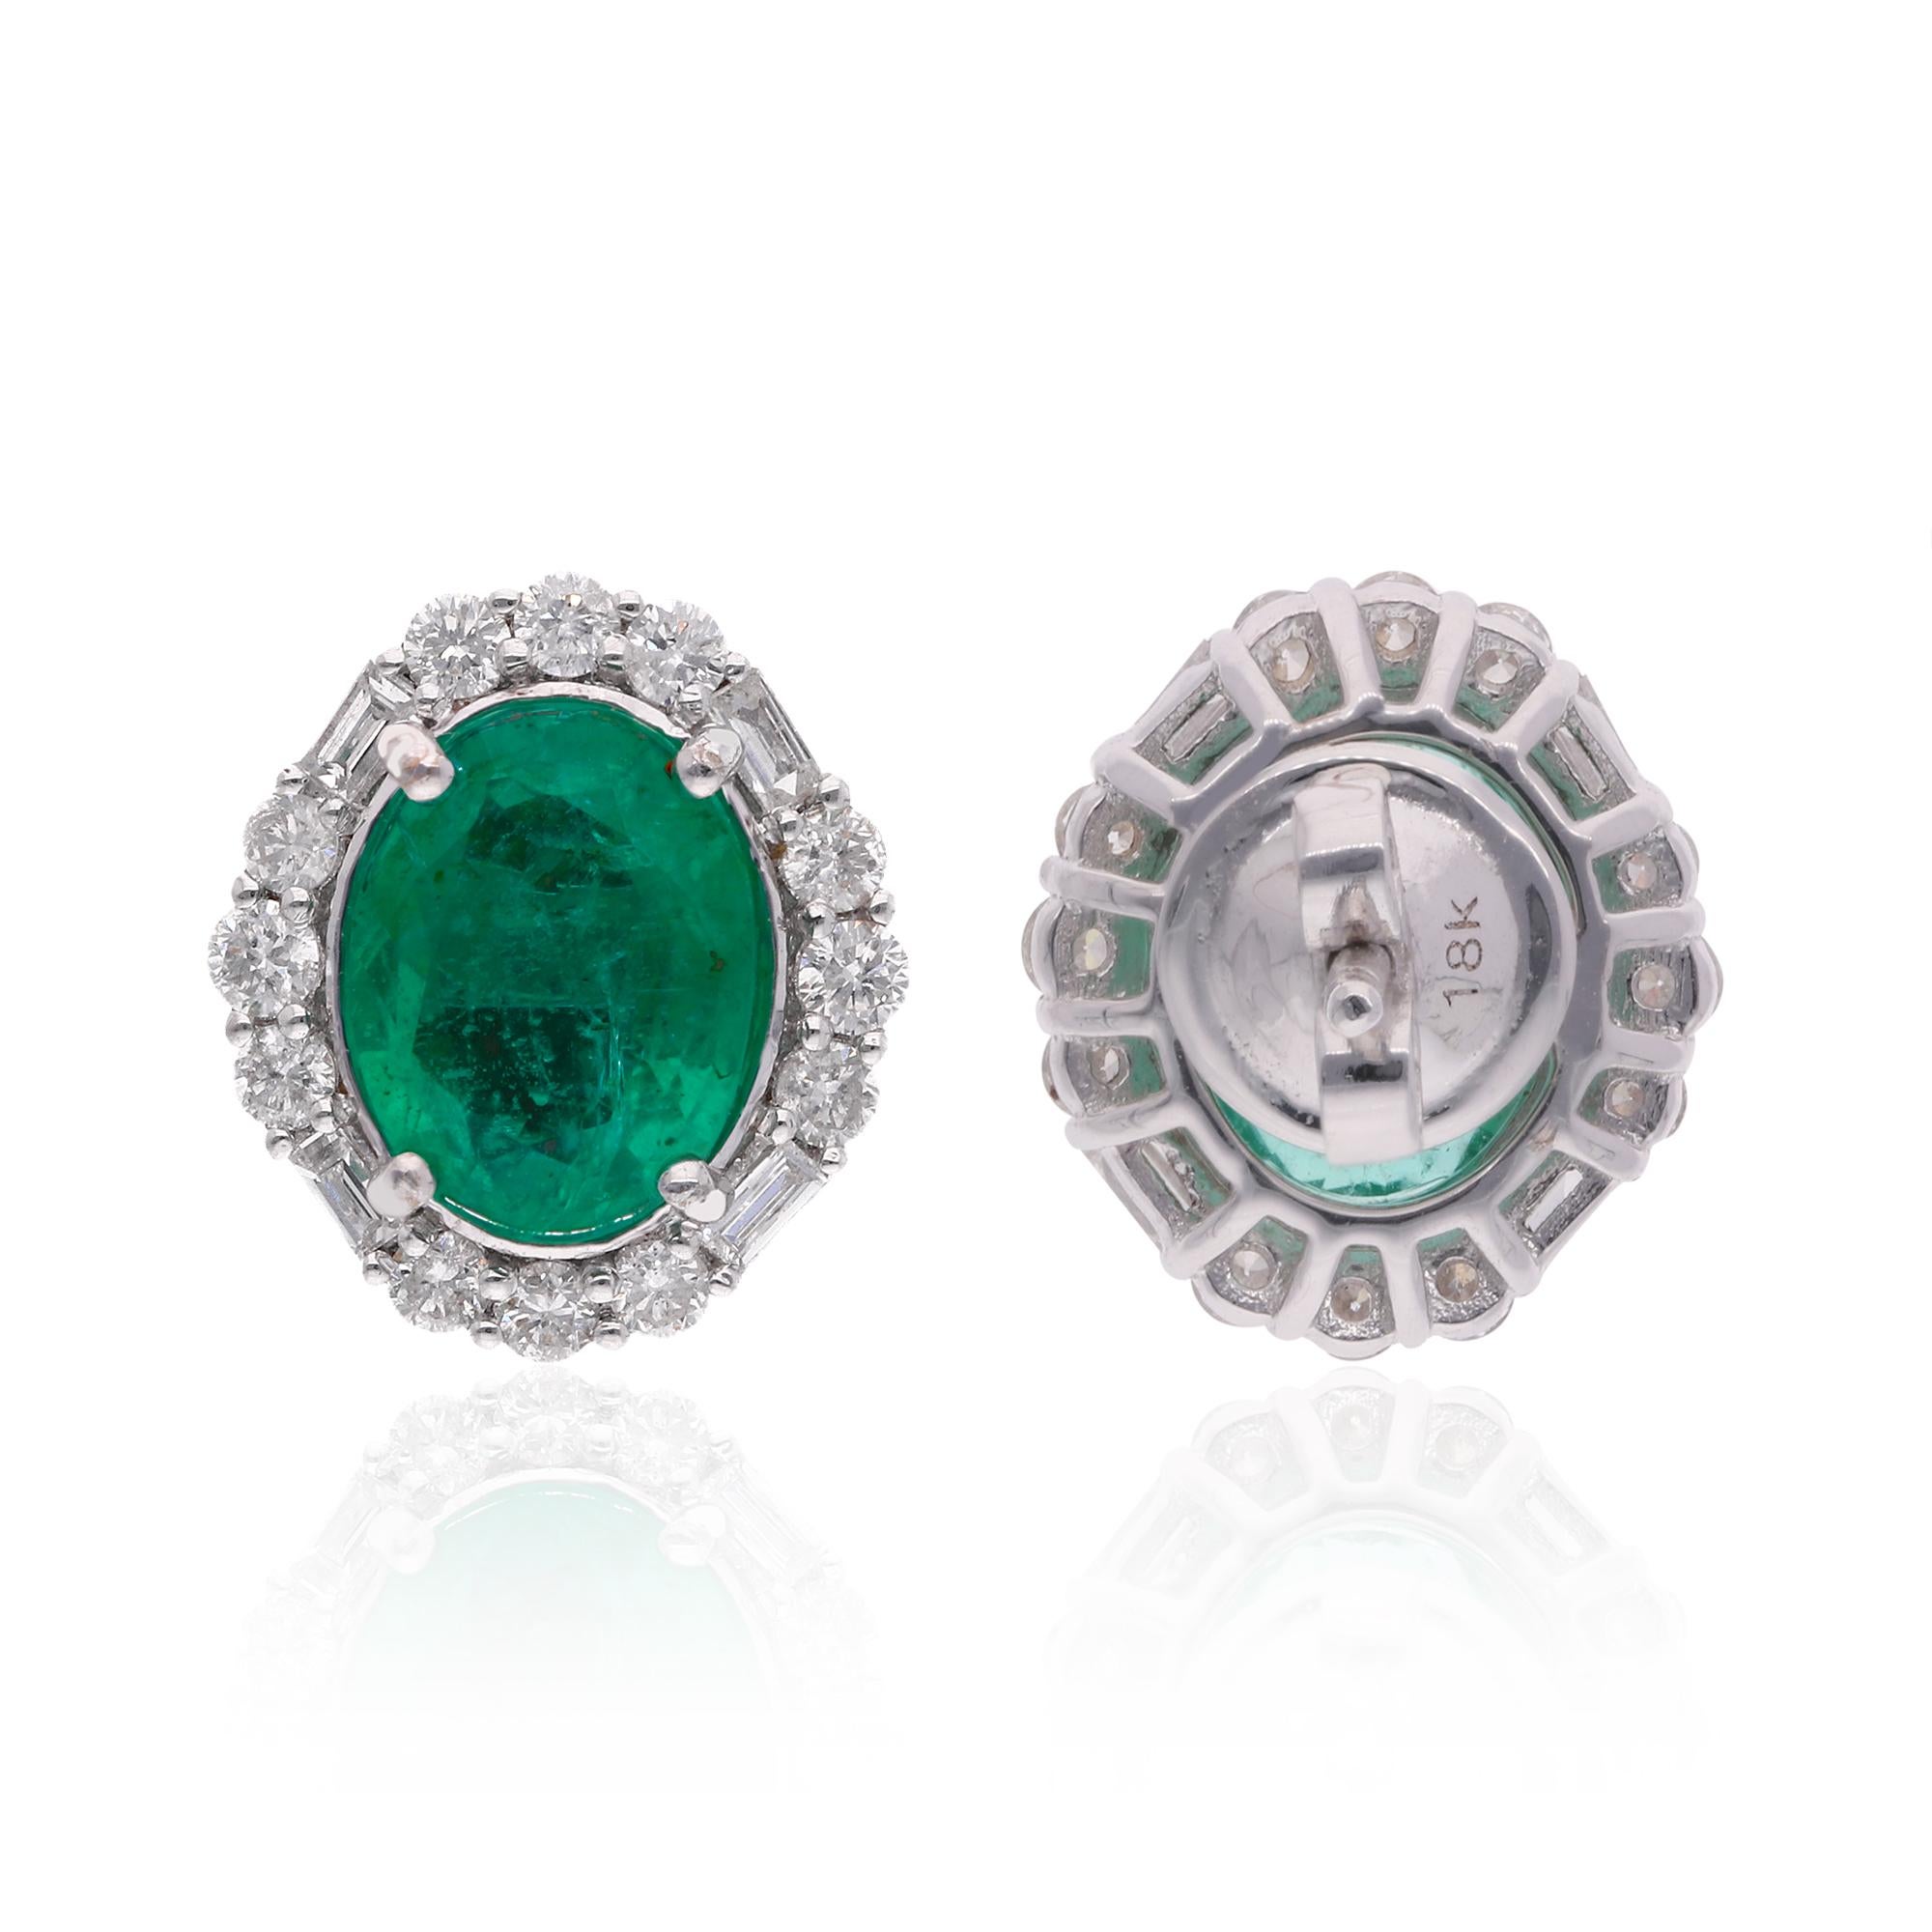 Item Code :- SEE-13110
Gross Wt. :- 4.51 gm
18k White Gold Wt. :- 3.71 gm
Diamond Wt. :- 0.75 Ct. ( AVERAGE DIAMOND CLARITY SI1-SI2 & COLOR H-I )
Emerald Wt. :- 3.25 Ct.
Earrings Size :- 13 mm approx.

✦ Sizing
.....................
We can adjust